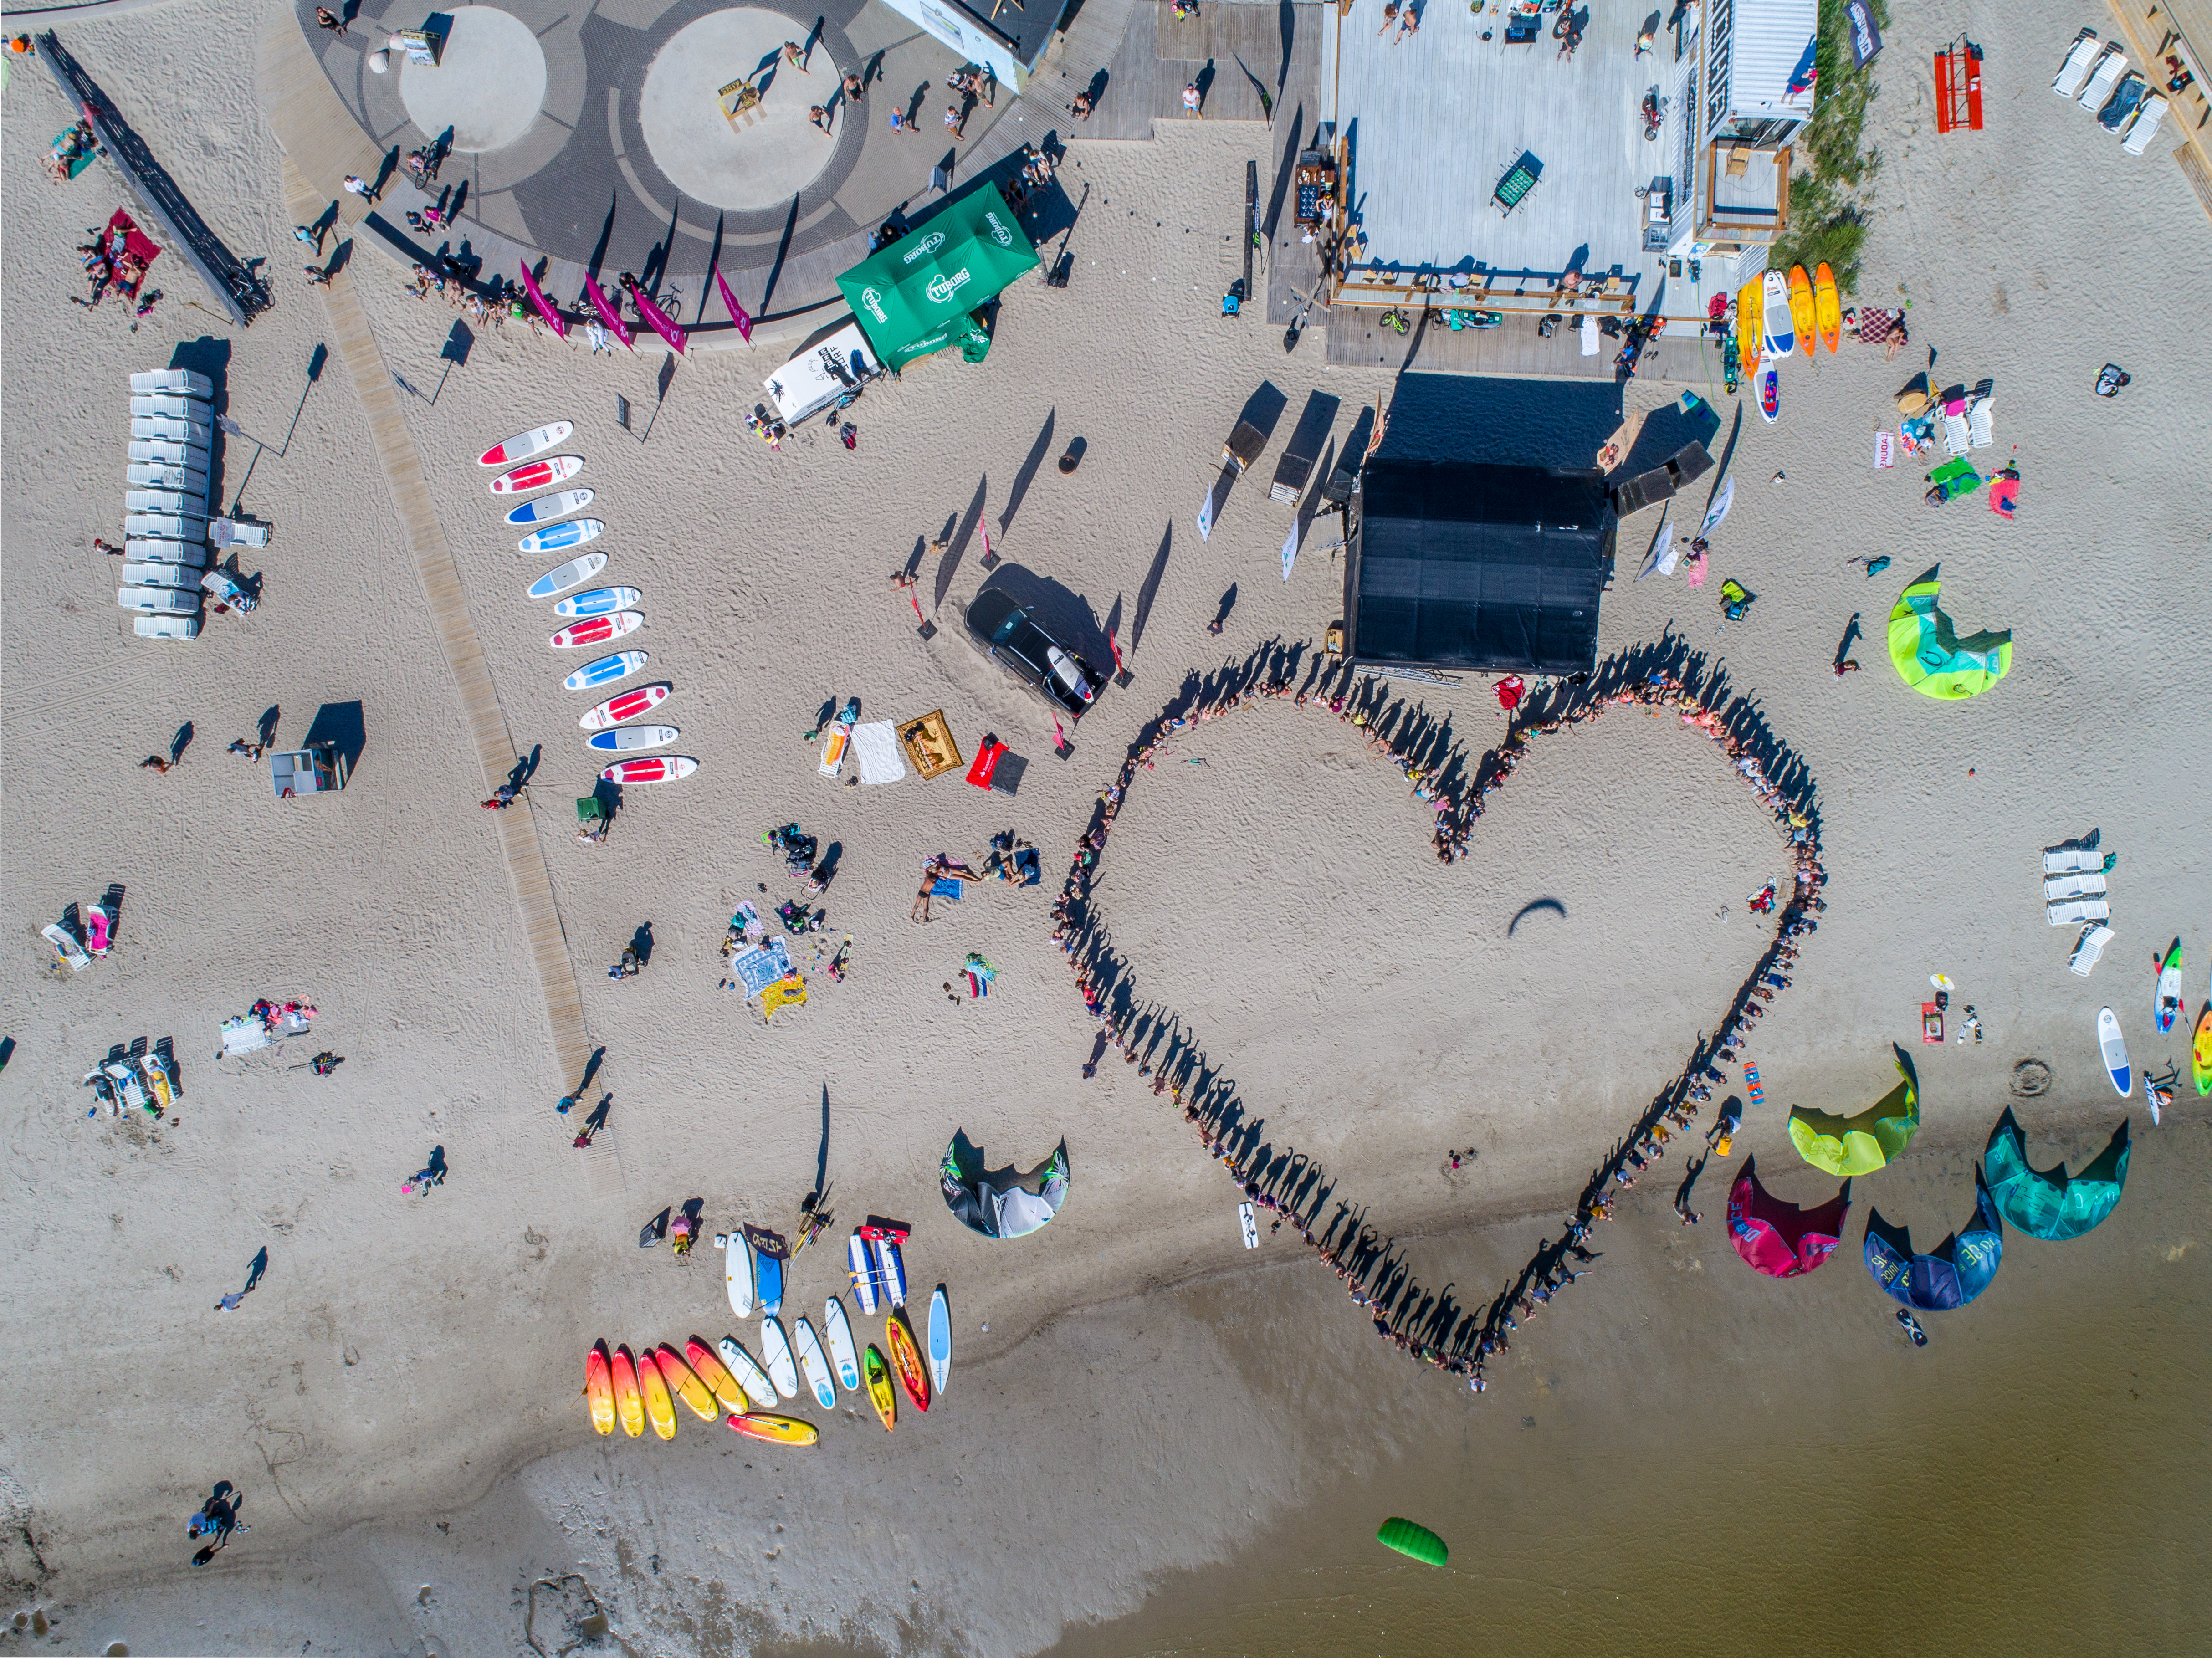 Beach with surfboards and people standing in the form of a heart.